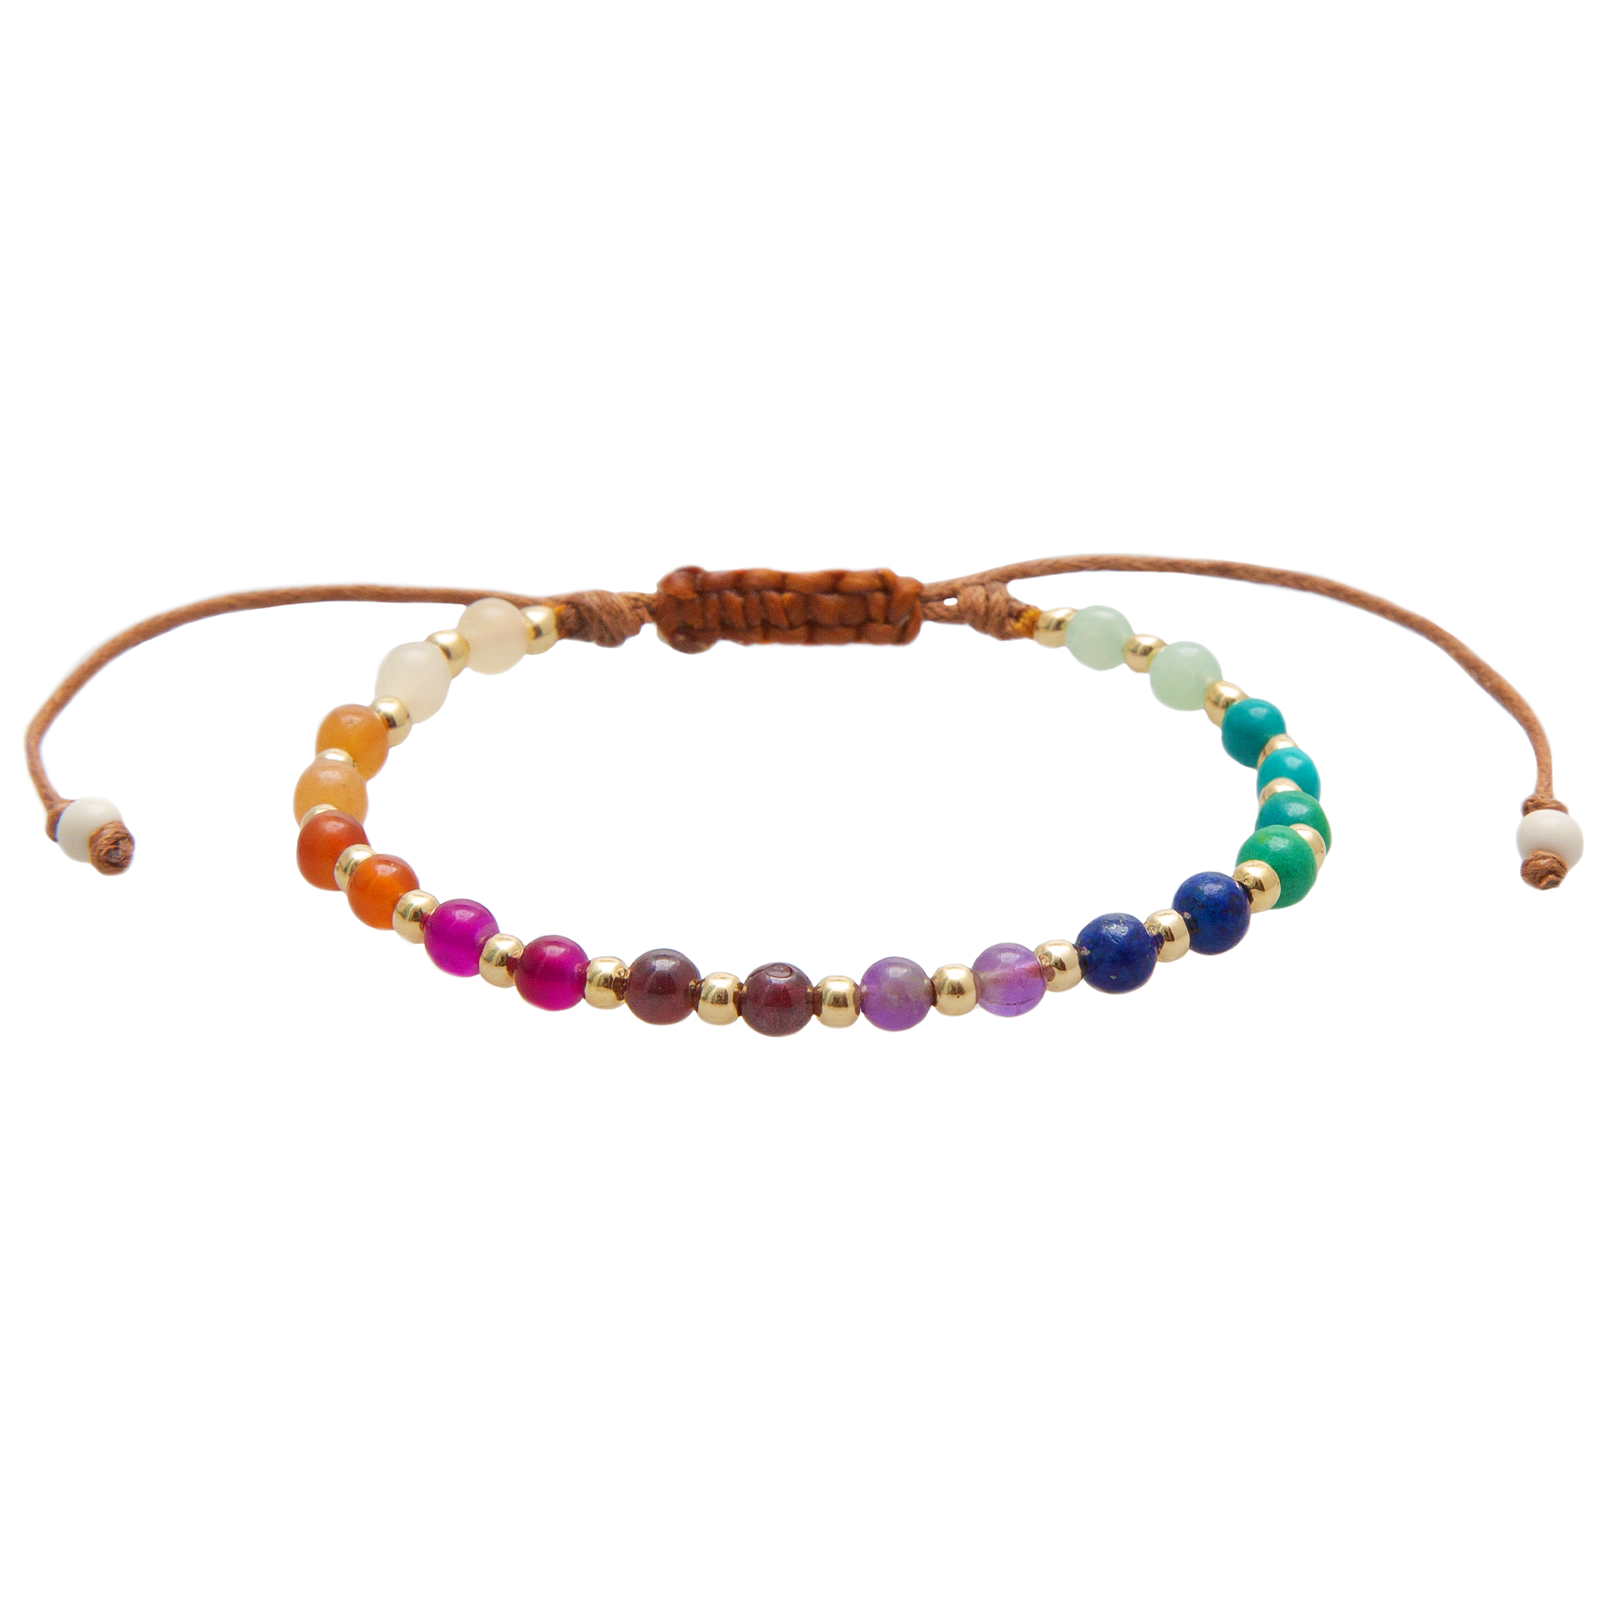 4mm multicolor stone and gold bead healing bracelet with a brown cotton pull through closure